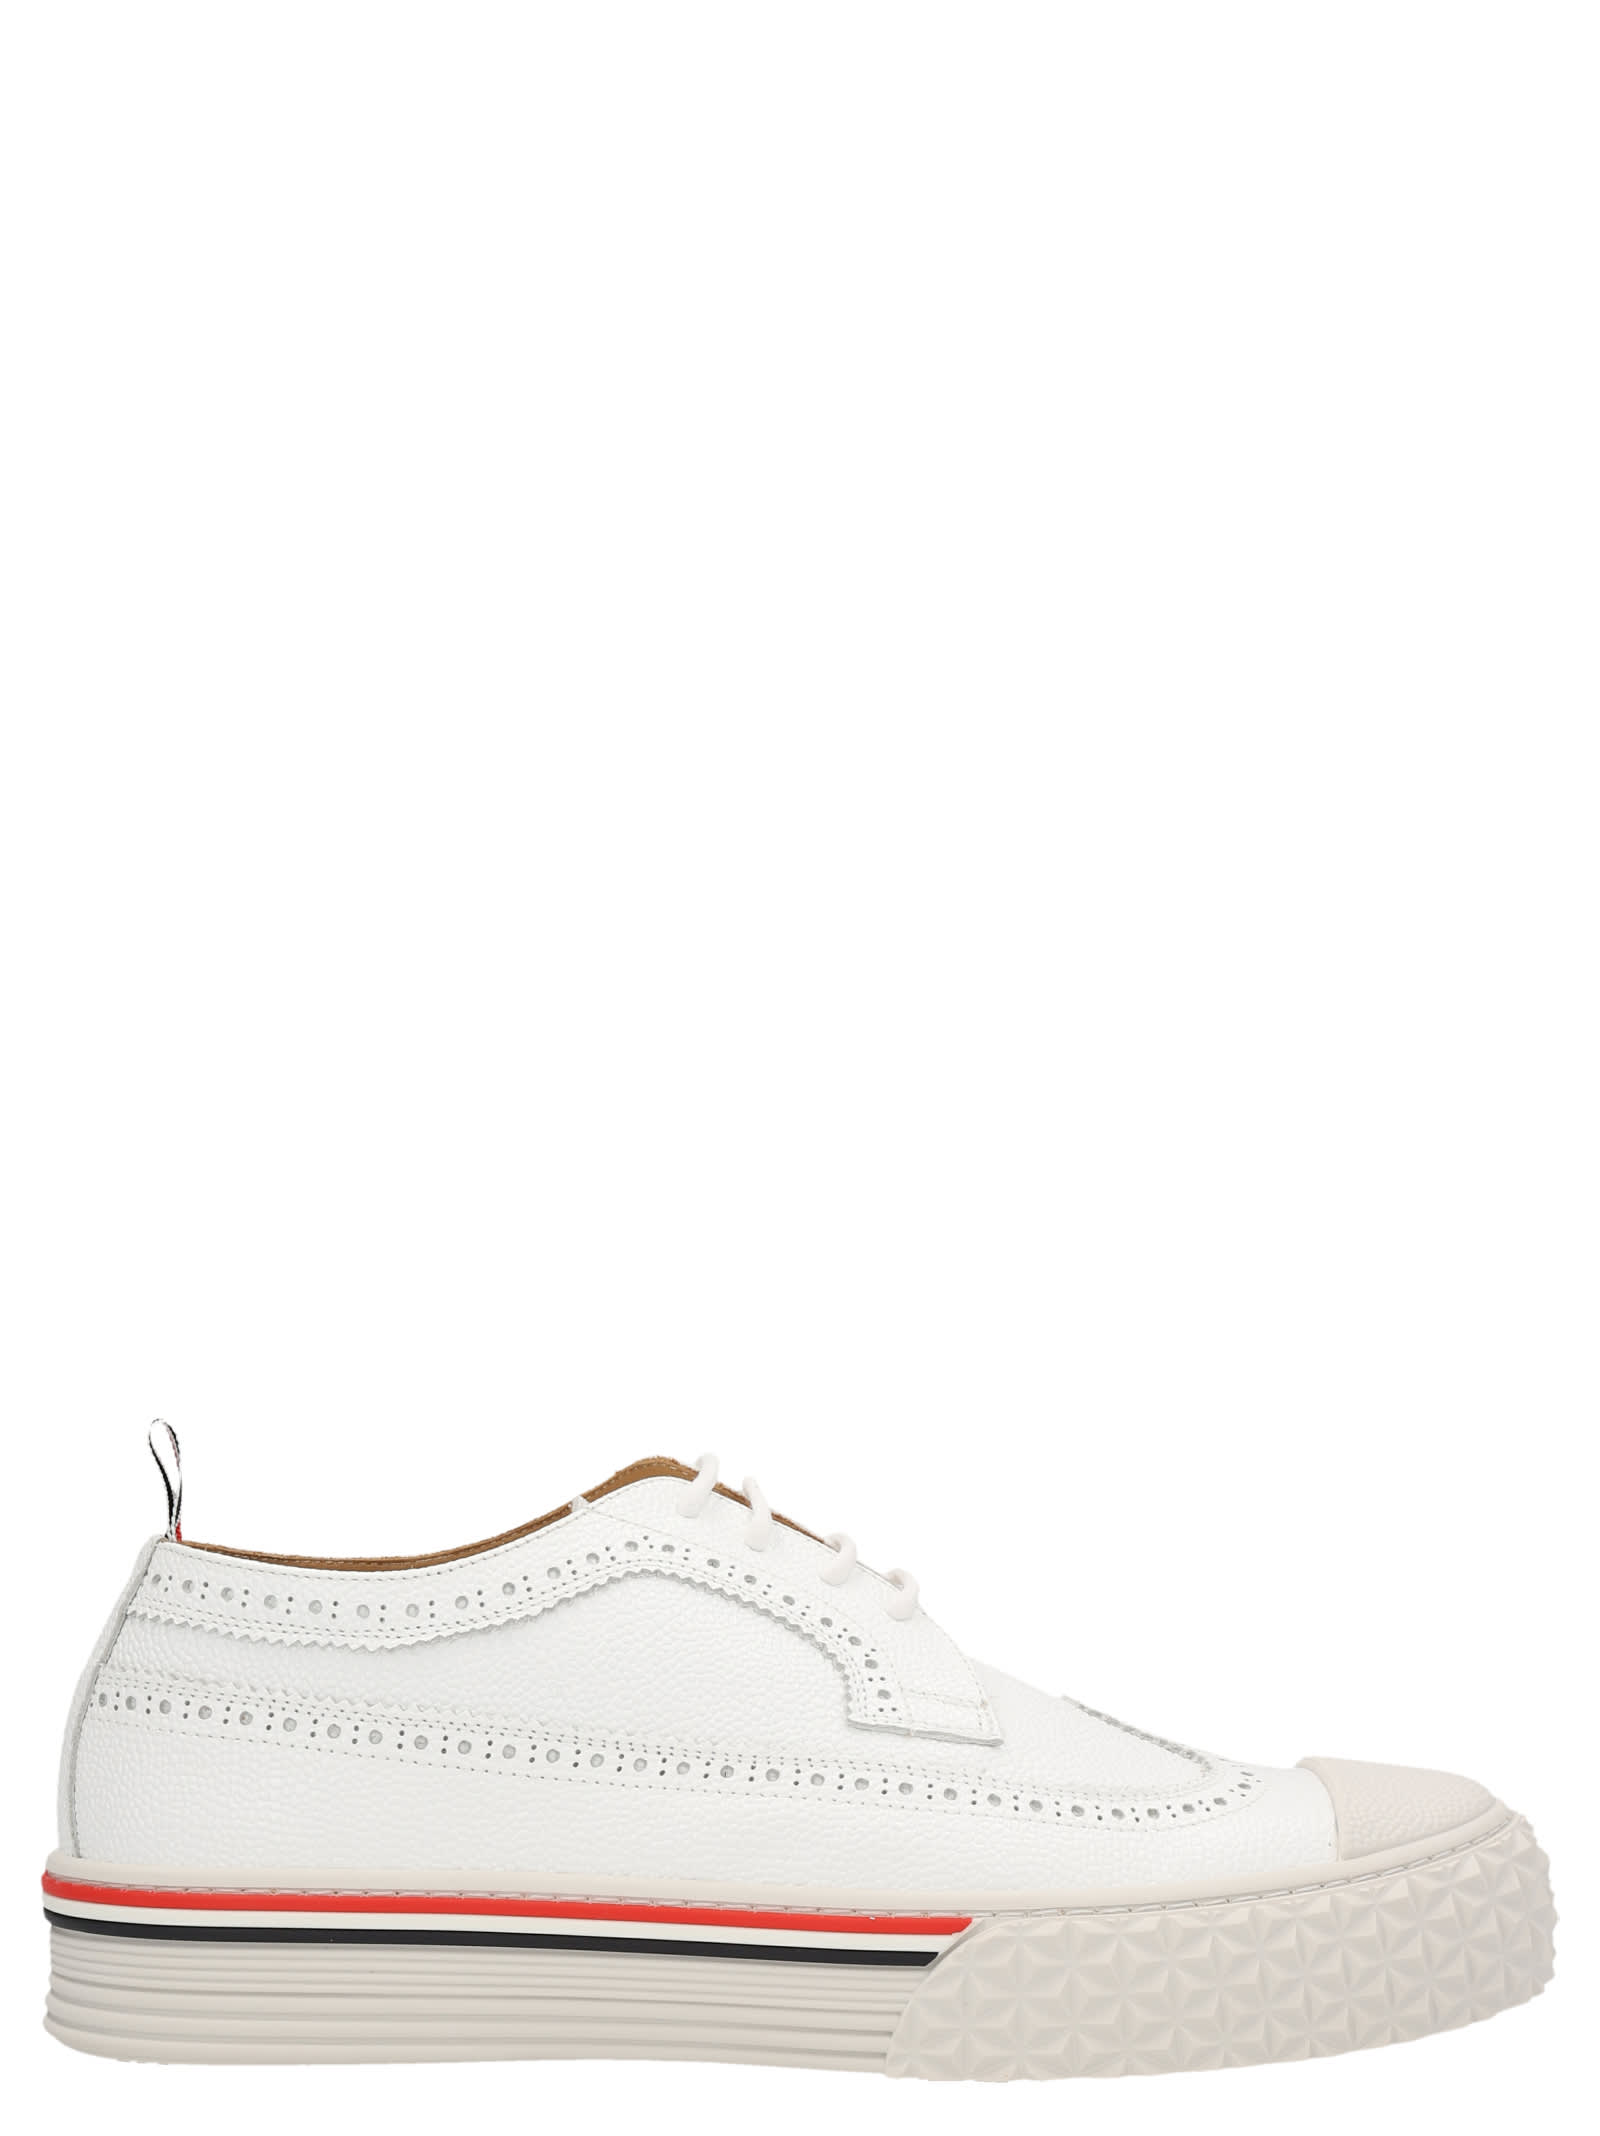 THOM BROWNE LONGWING BROGUE DERBY SHOES